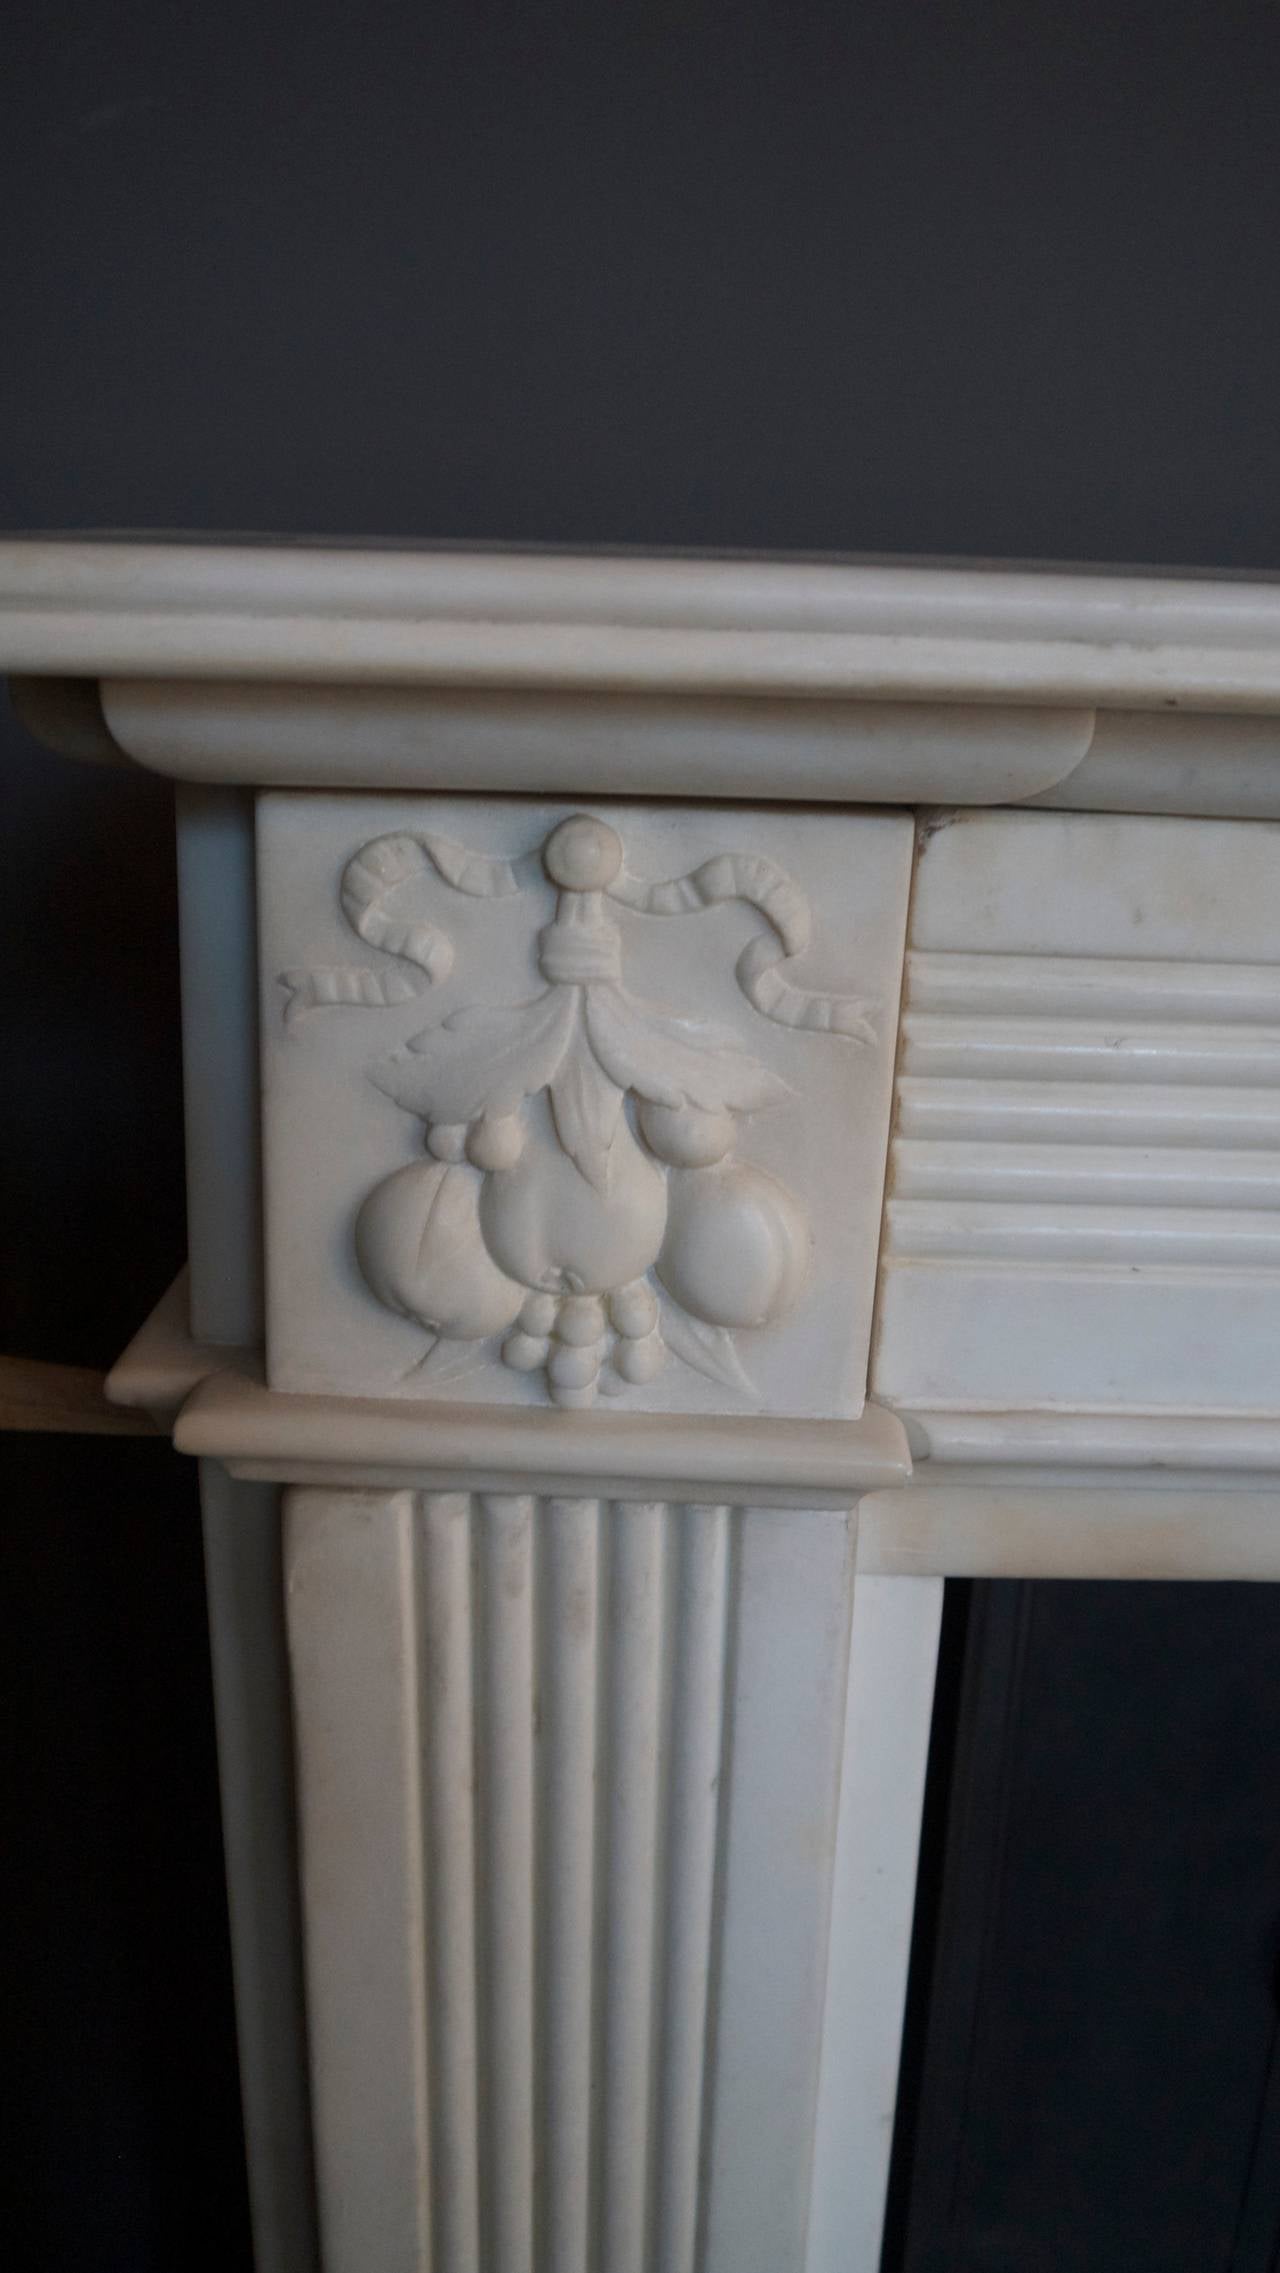 Original exceptional 18th century statuary white Georgian marble surround with a fruit bowl center plaque, carved cornerblocks, reeded legs and frieze and a birds beak shelf.